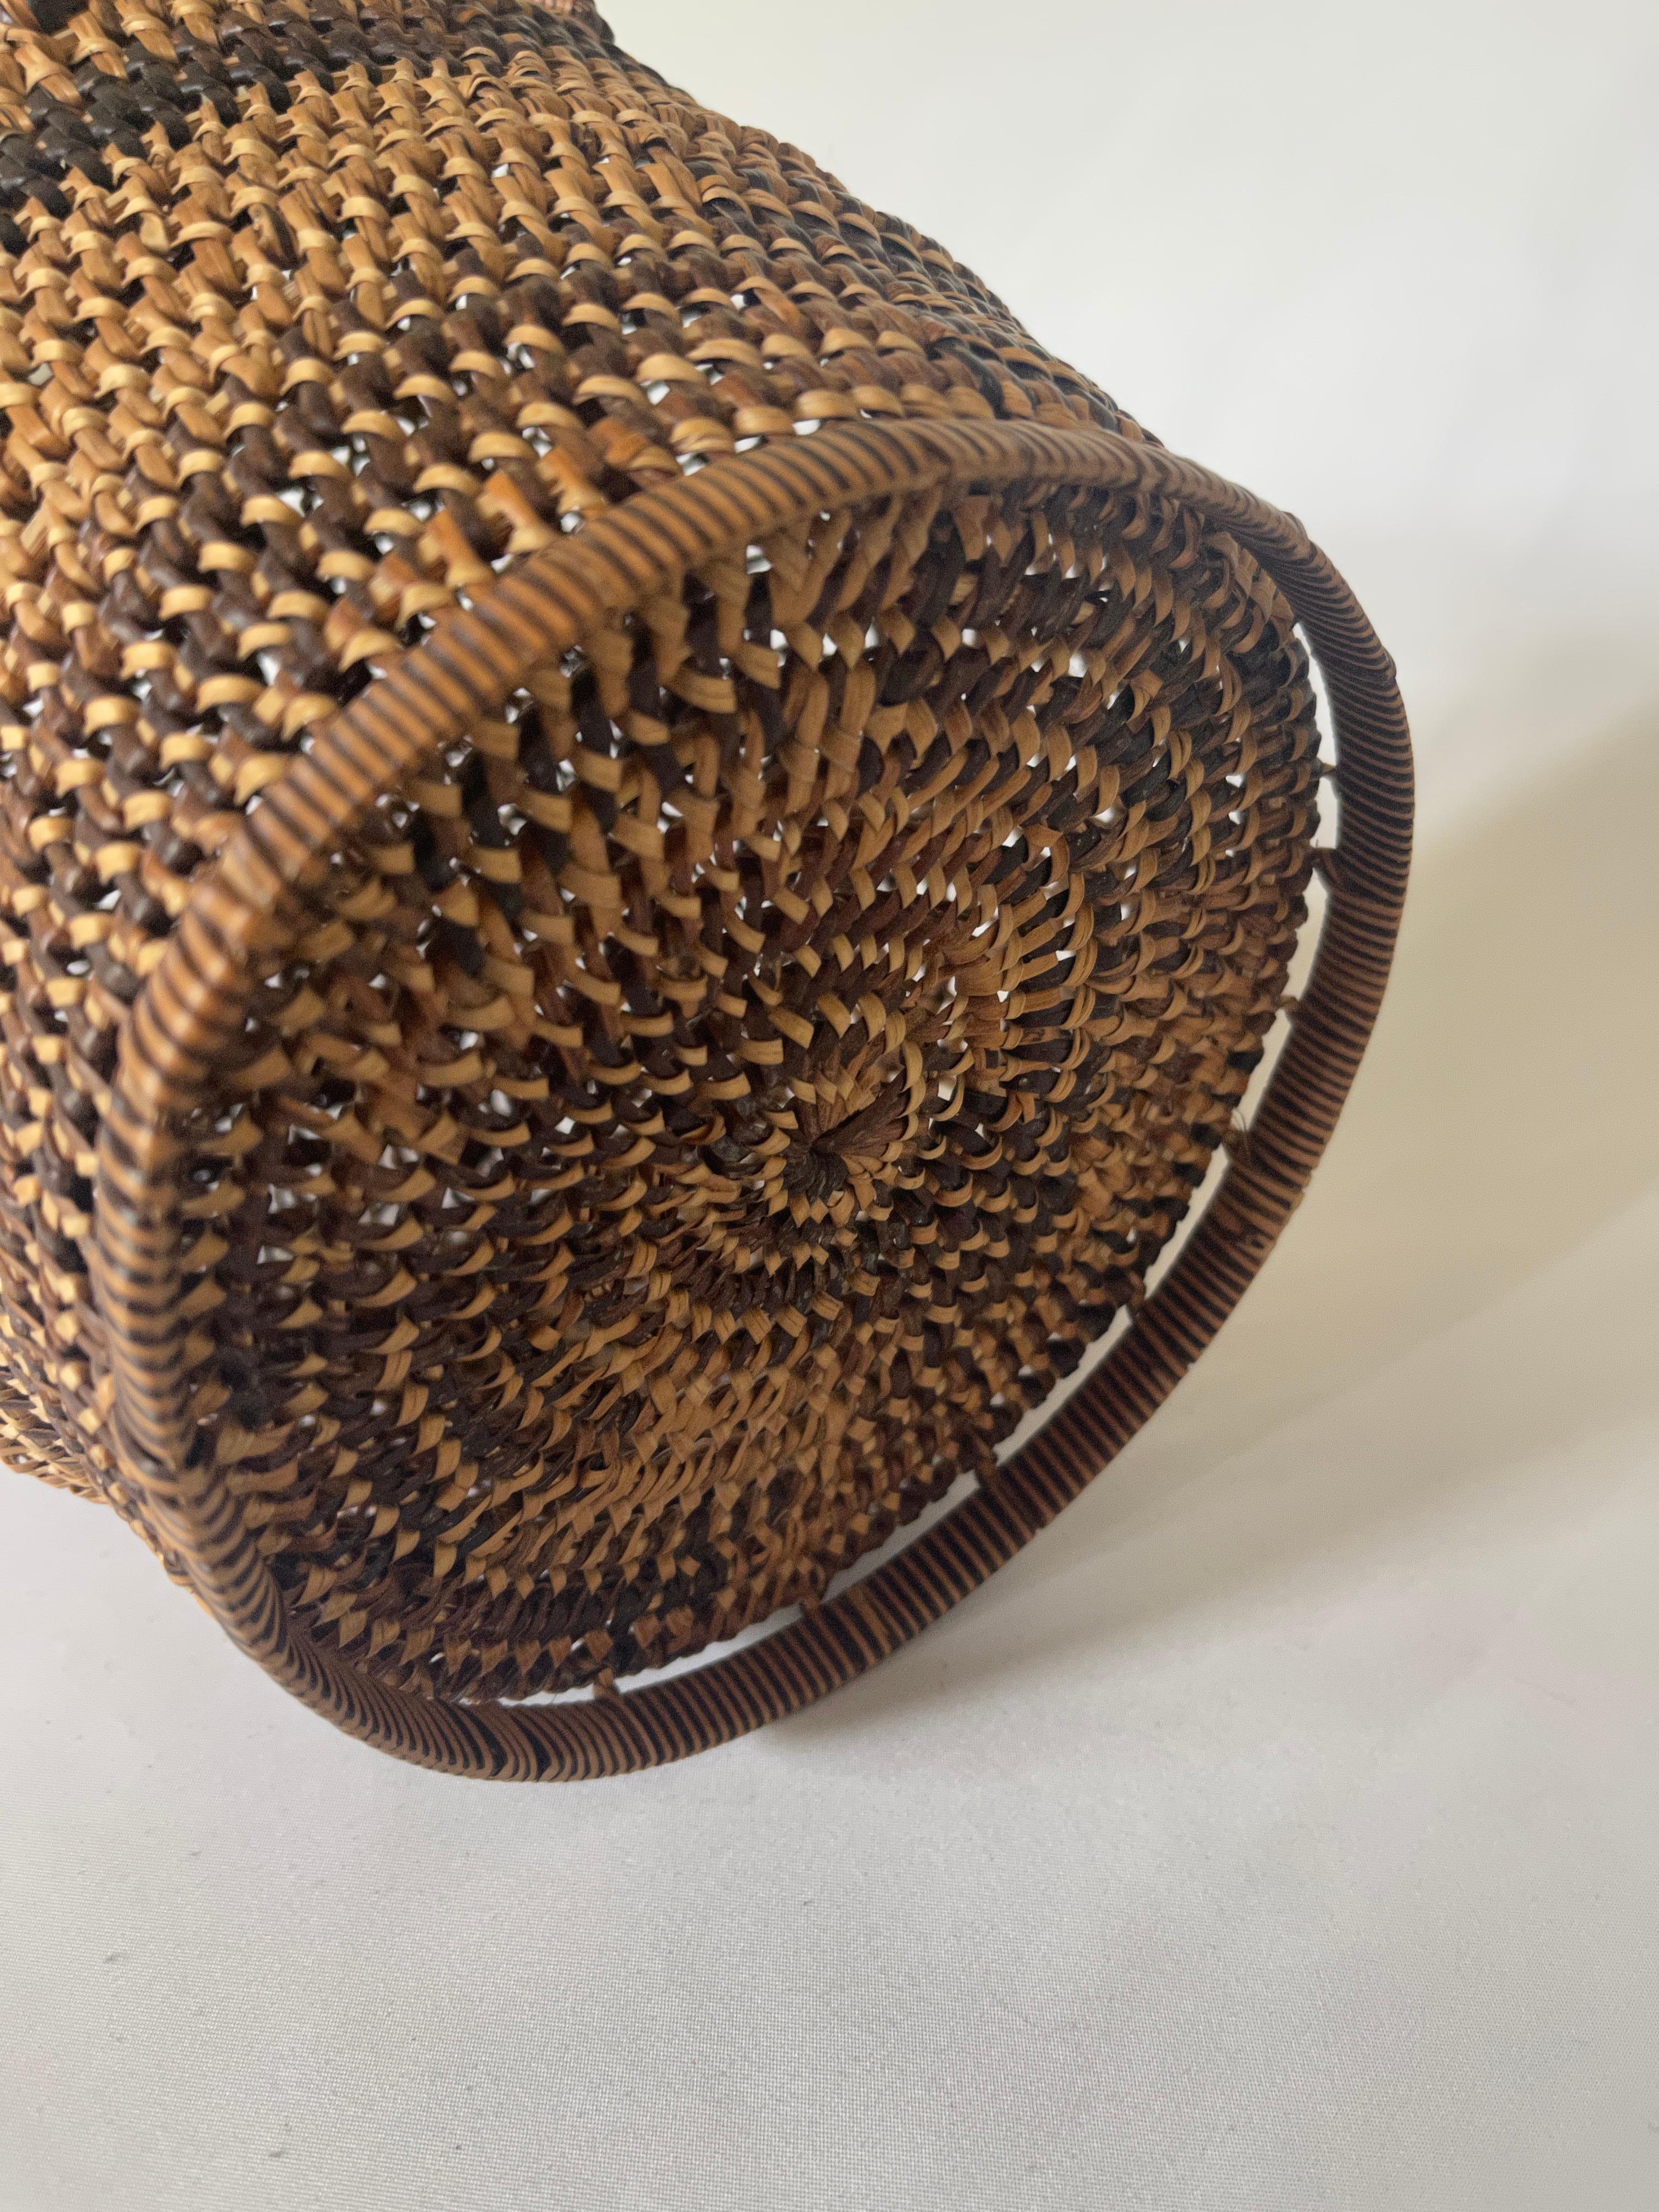 1930's Hand Woven Fish Basket Purse Bucket Bag For Sale 2